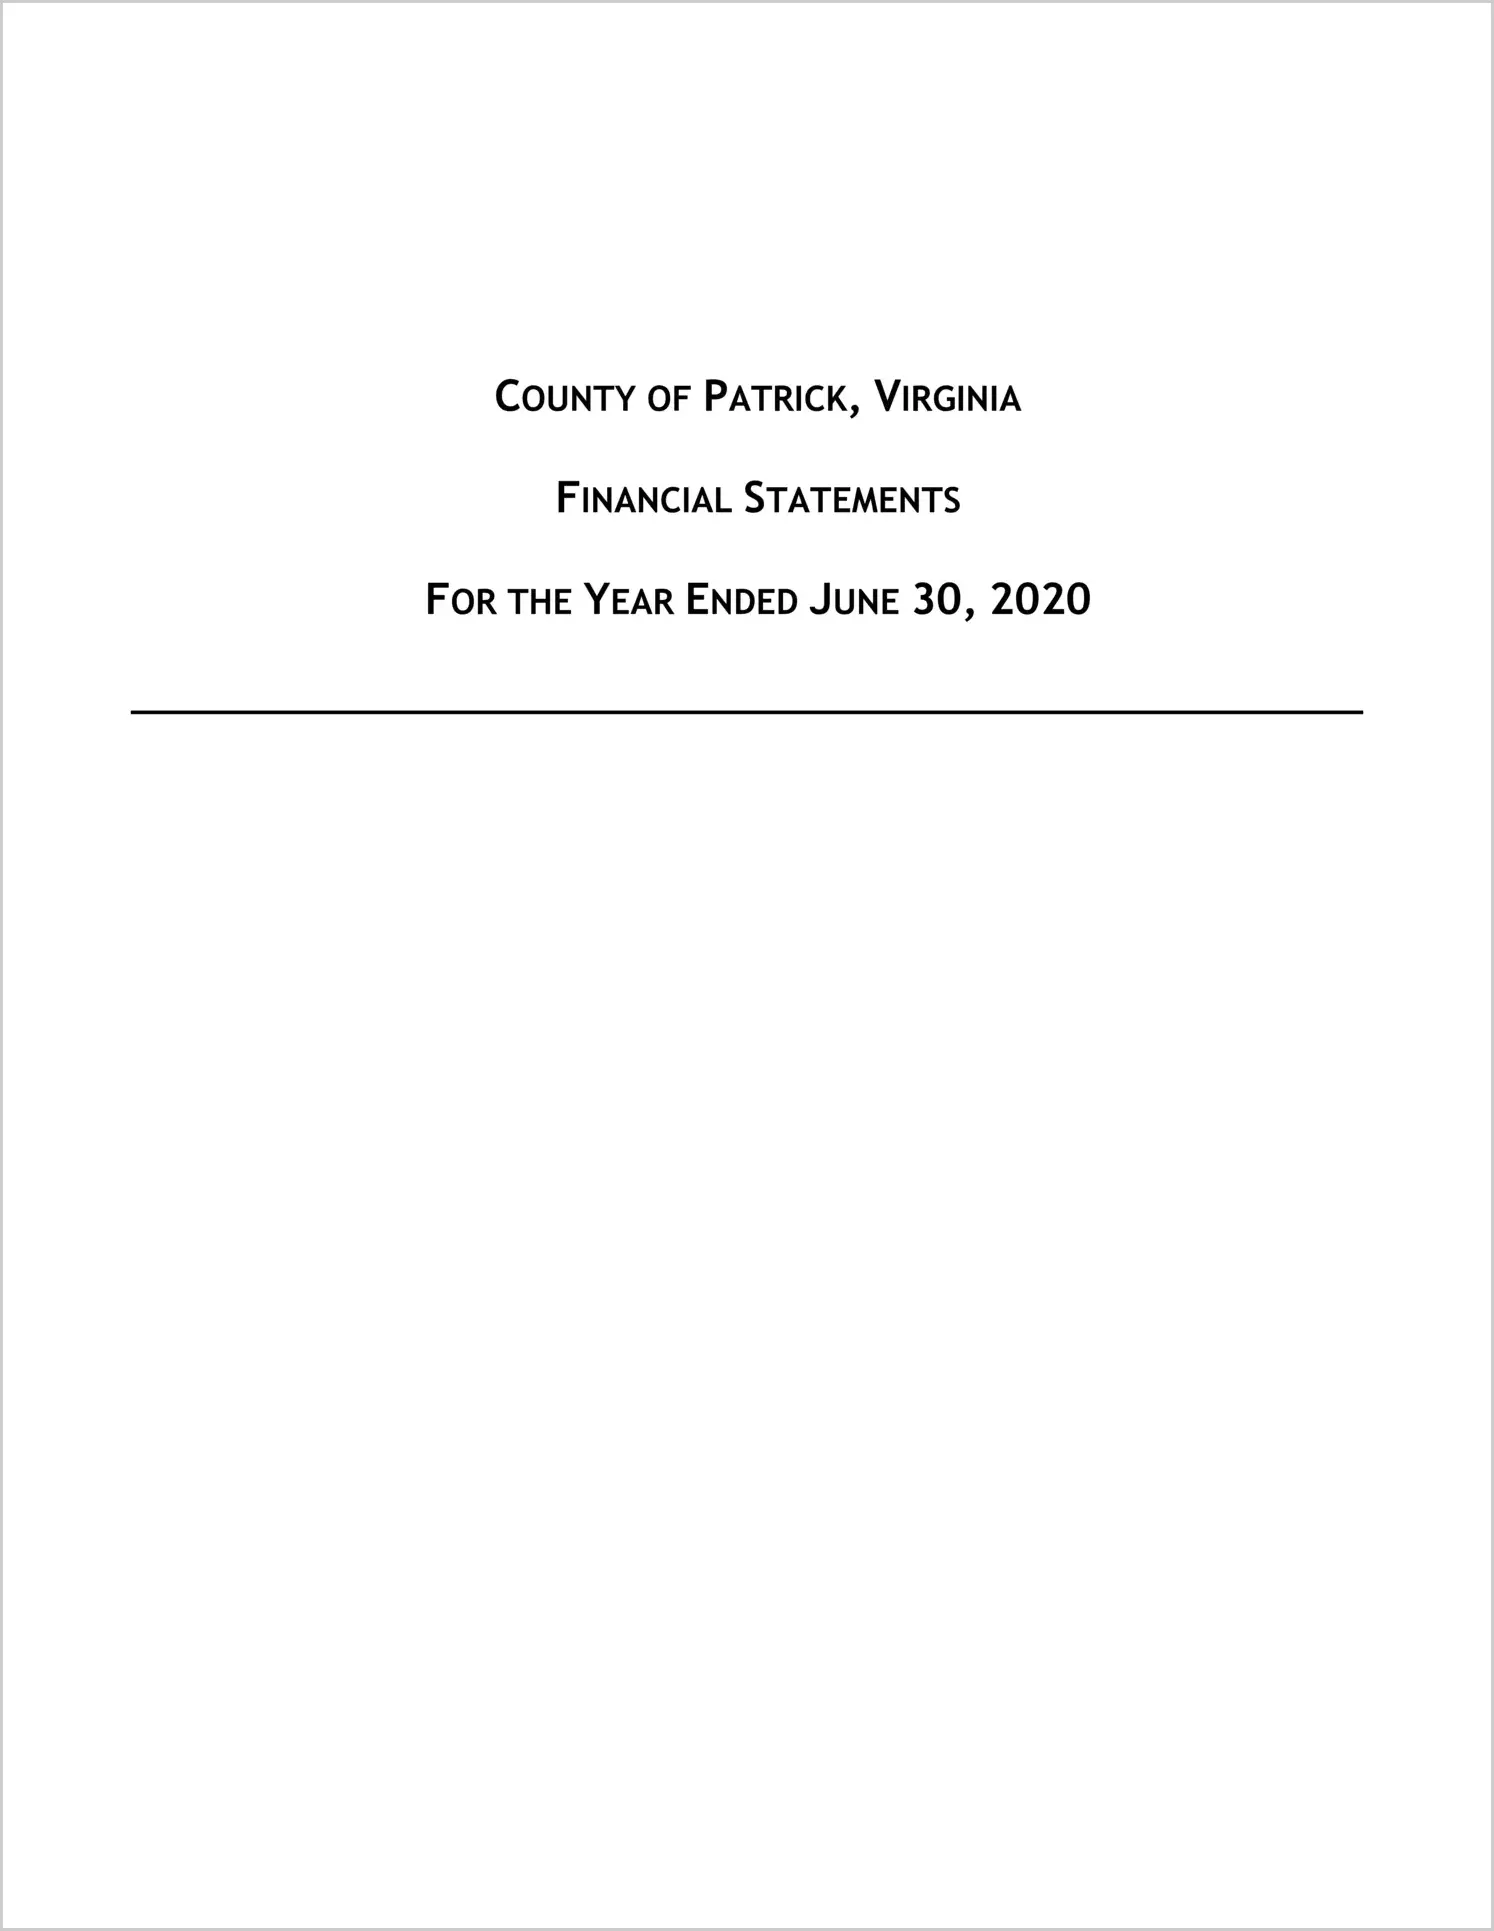 2020 Annual Financial Report for County of Patrick